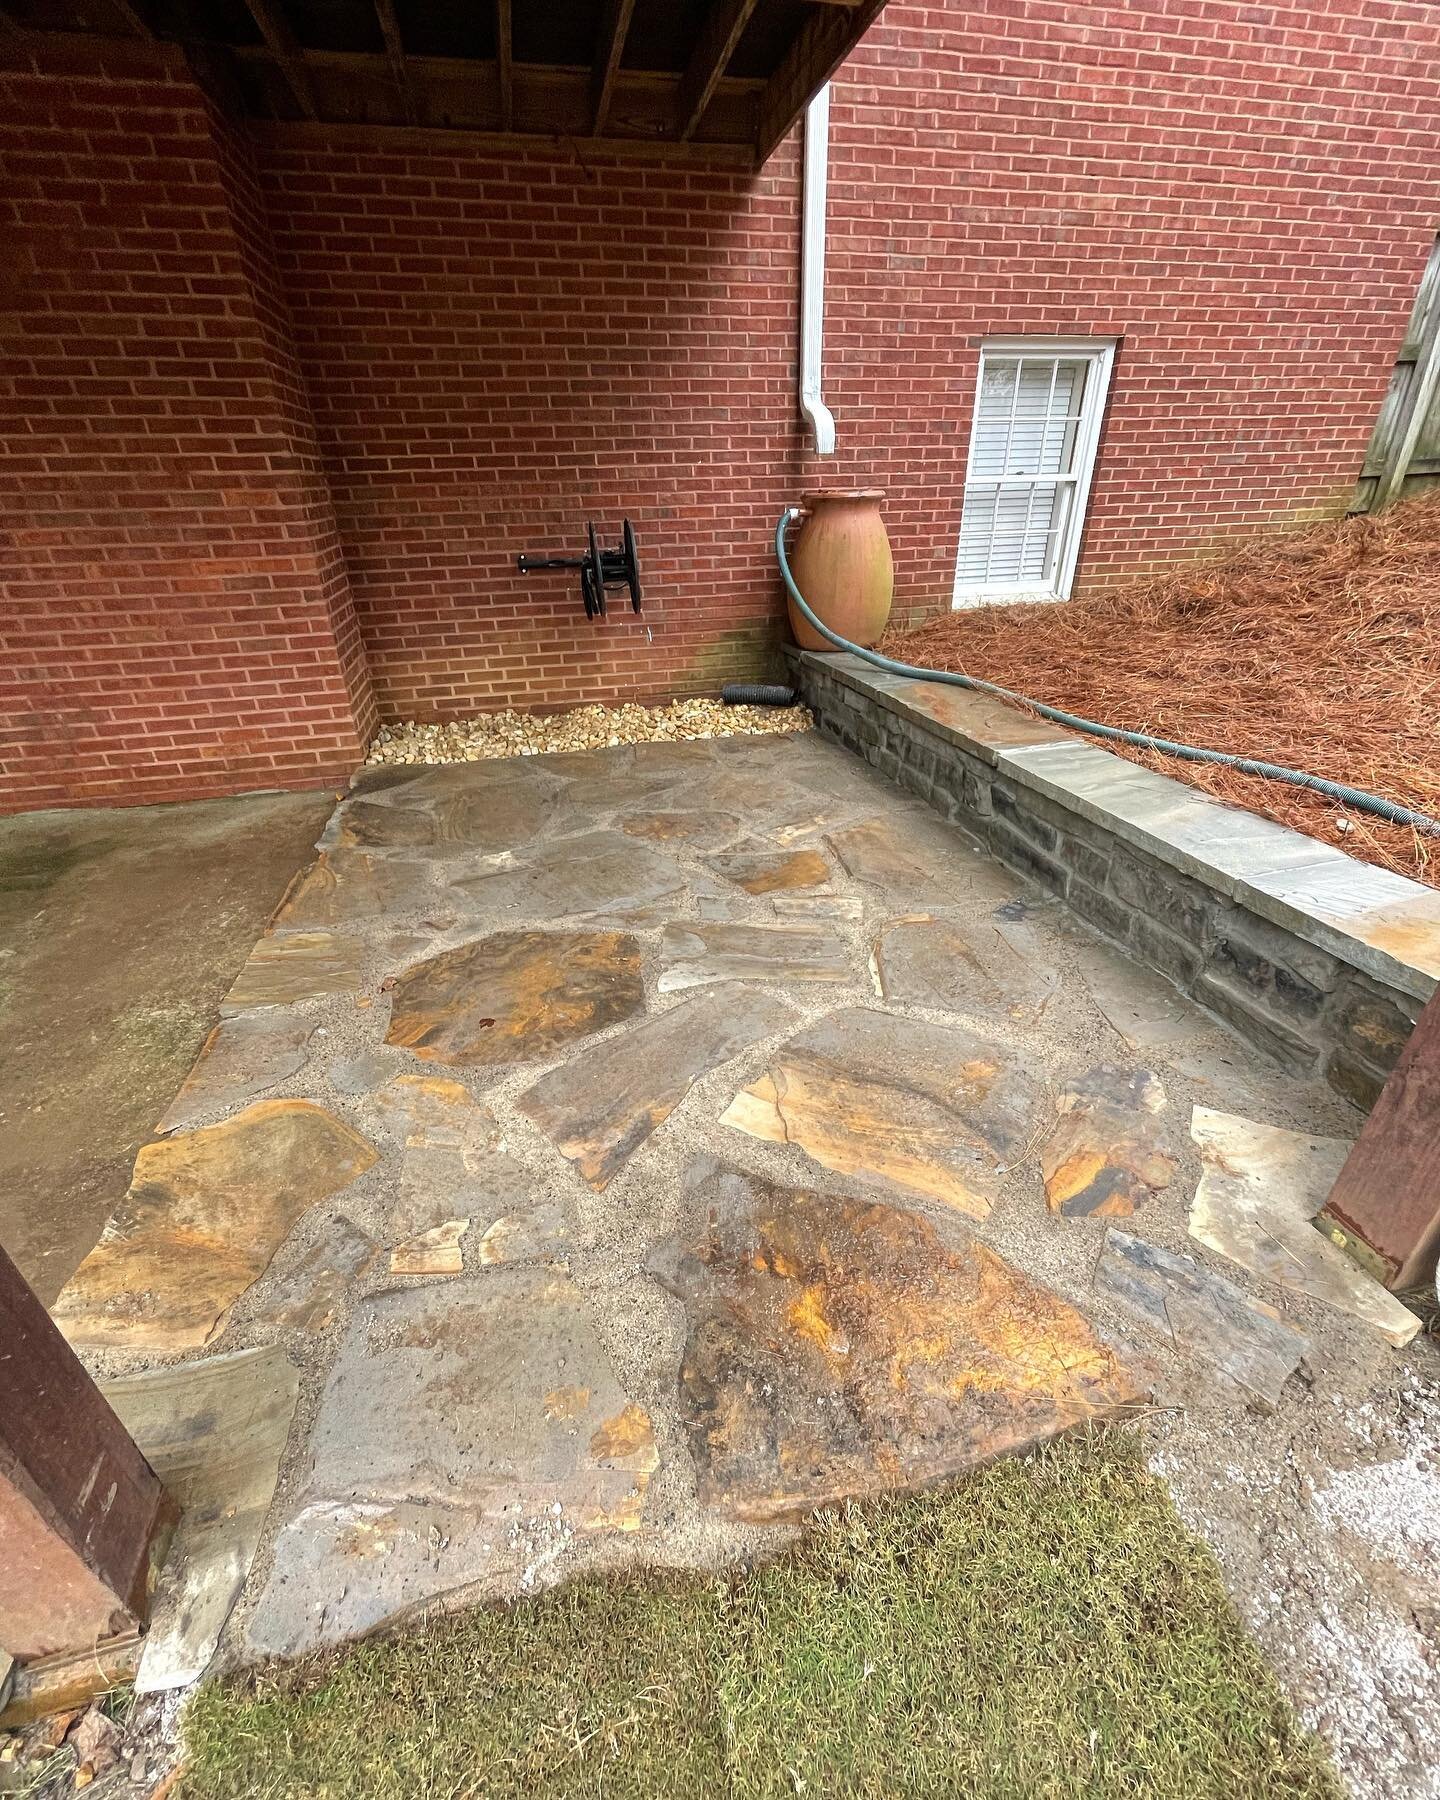 Flagstone patio! Just playing around with other material other than pavers!!!
.
.
.
.
.
#opengradedbase #flagstone #retainingwall #rainwaterharvesting #veneer #hardscape #patio